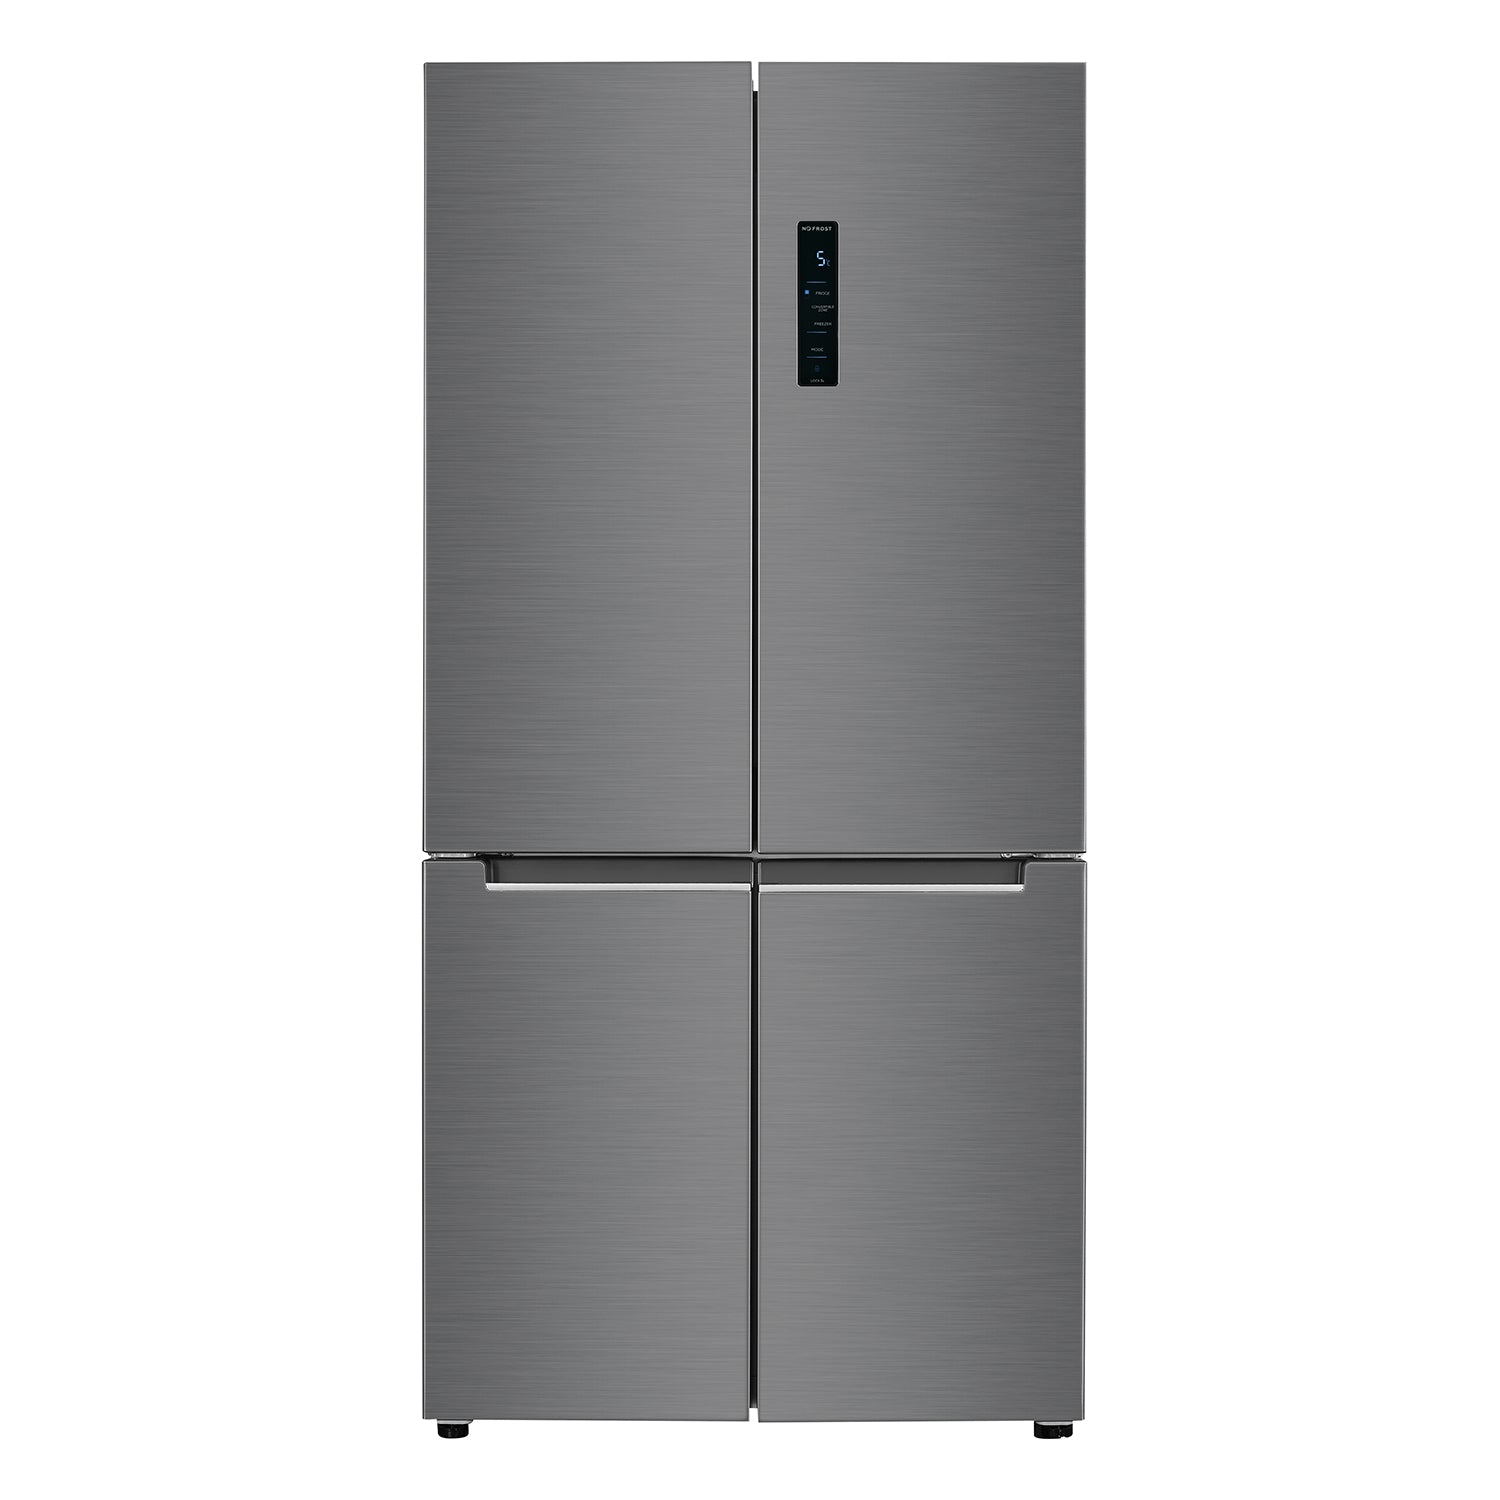 Mabe 586 Liters 4 Door Refrigerator Dual Cooling System Grey | in Bahrain | Halabh.com